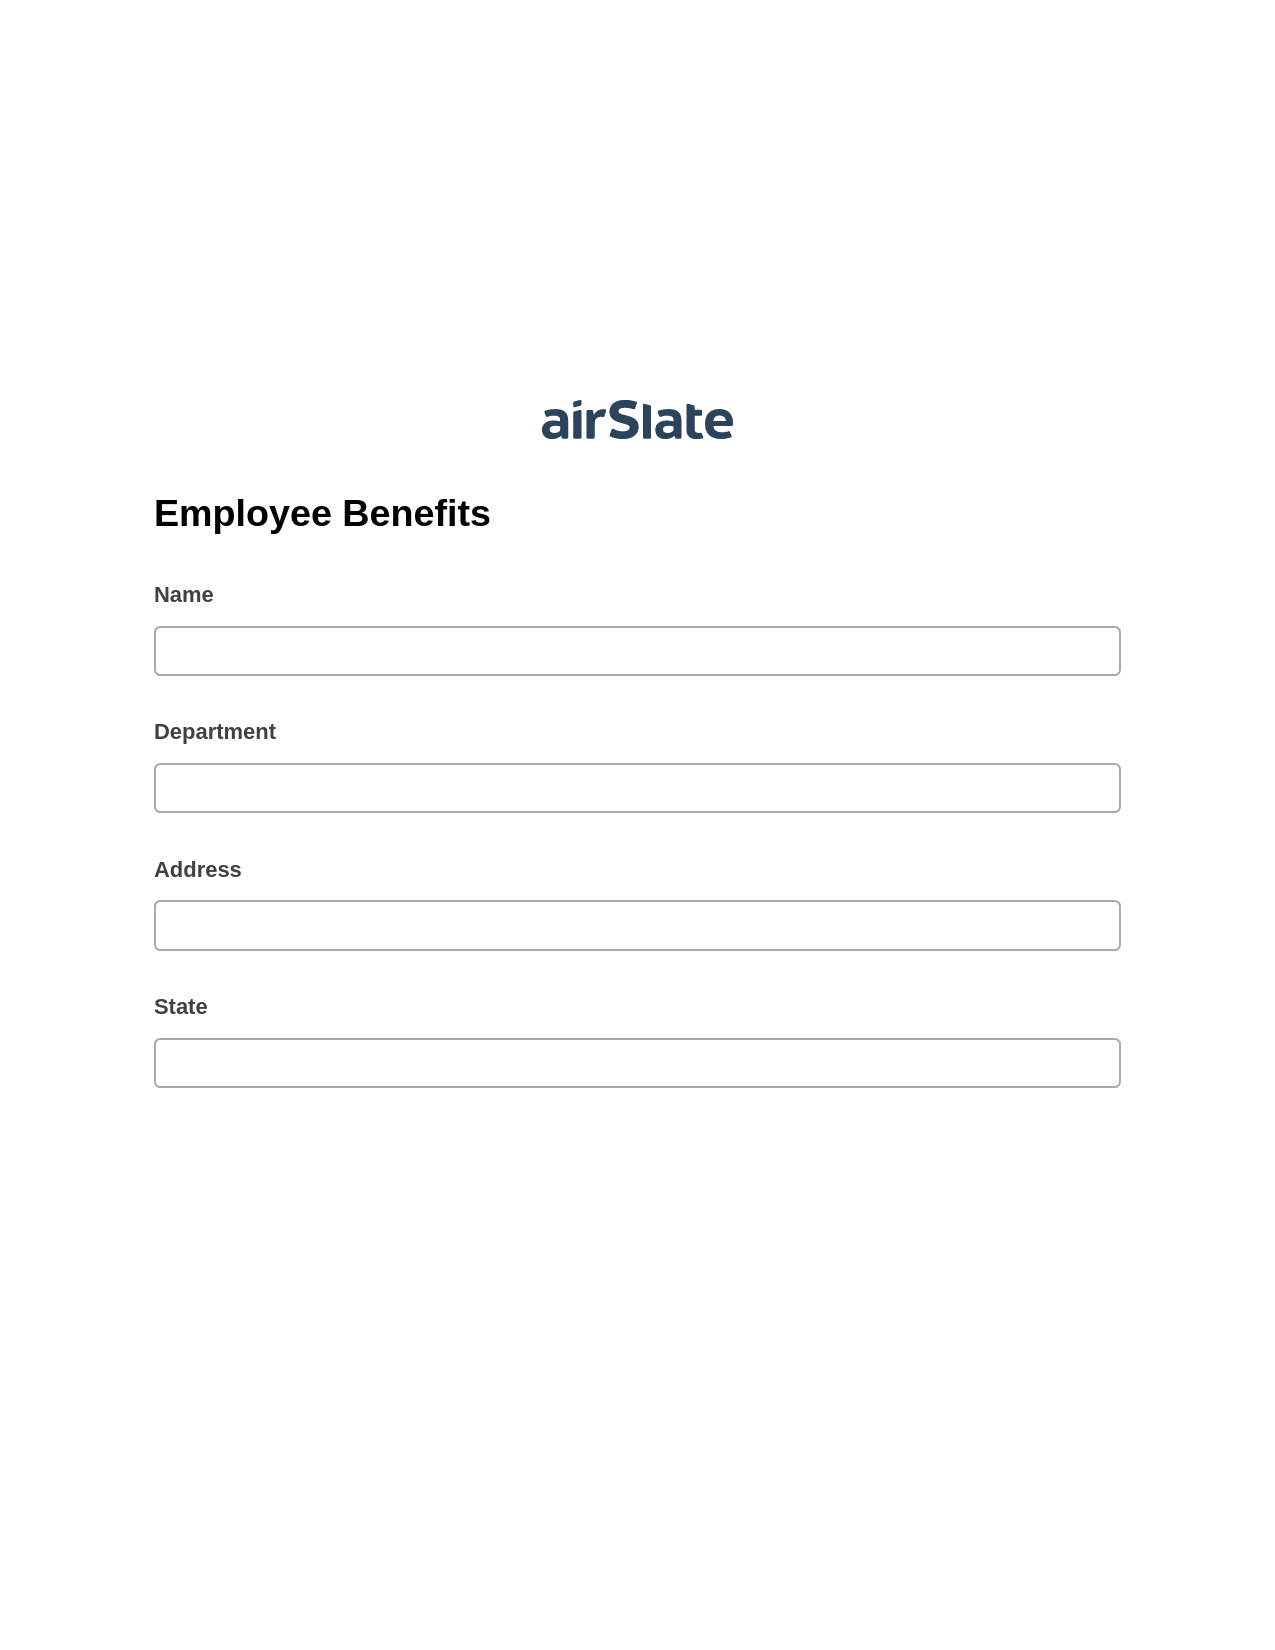 Employee Benefits Pre-fill Dropdown from Airtable, Assign Slate Name Bot, Export to Smartsheet